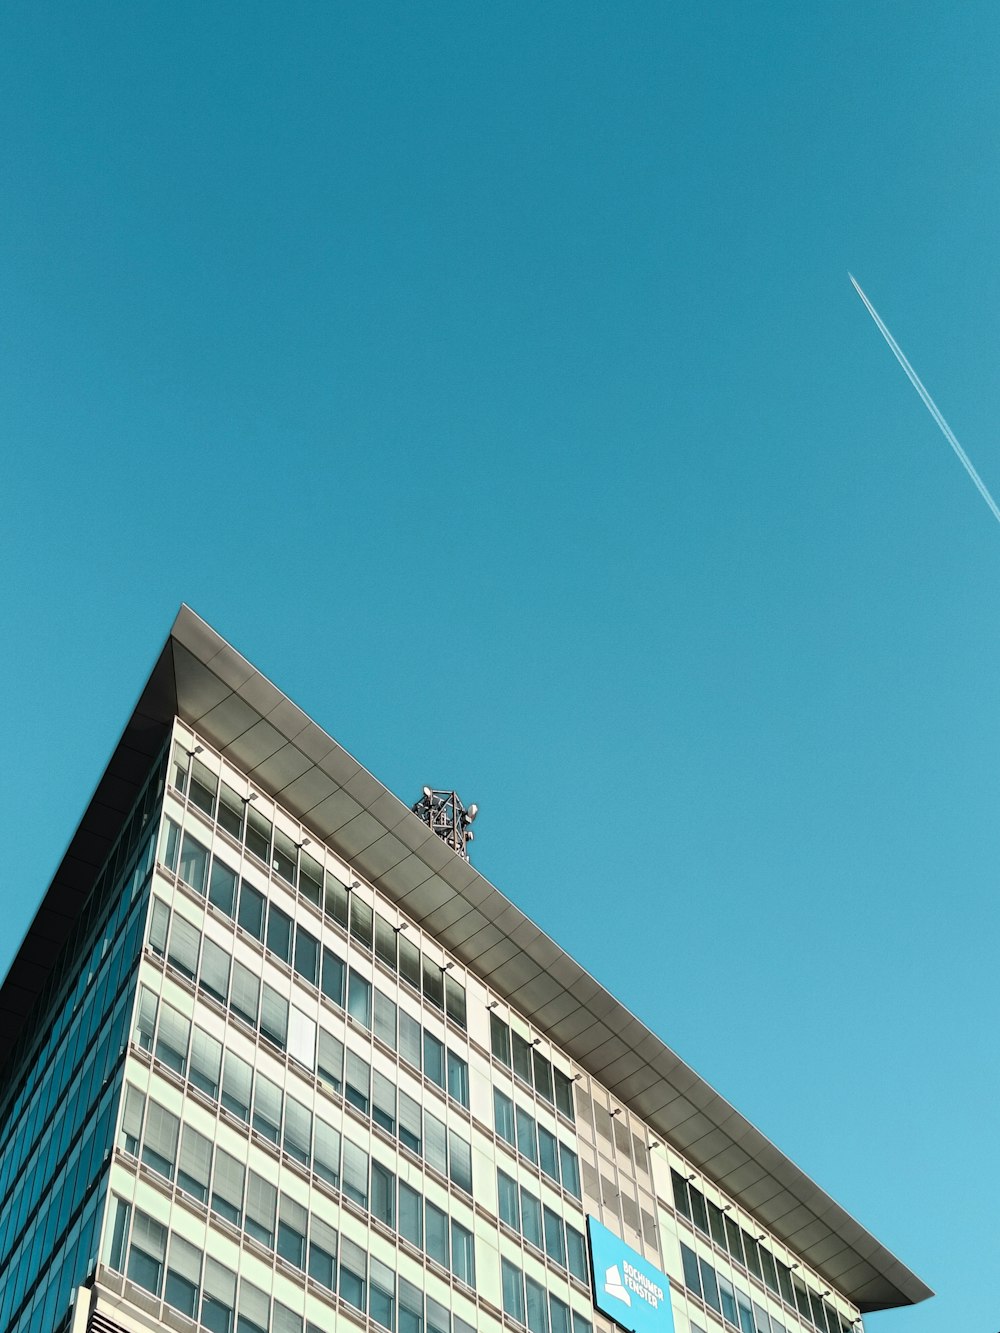 an airplane flying in the sky over a building